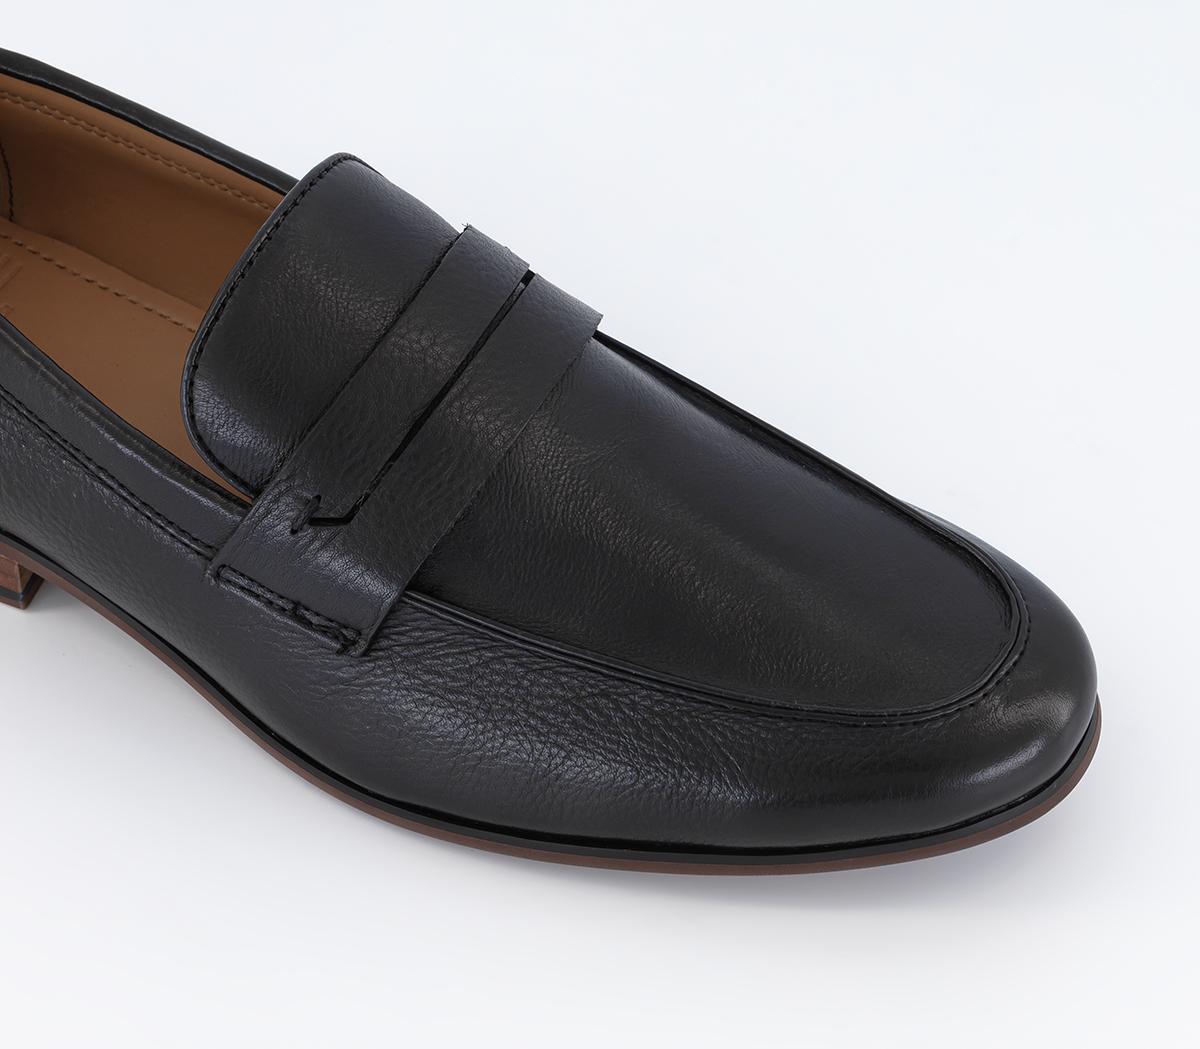 OFFICE Malibu Cut Out Saddle Loafers Black Leather - Men’s Smart Shoes